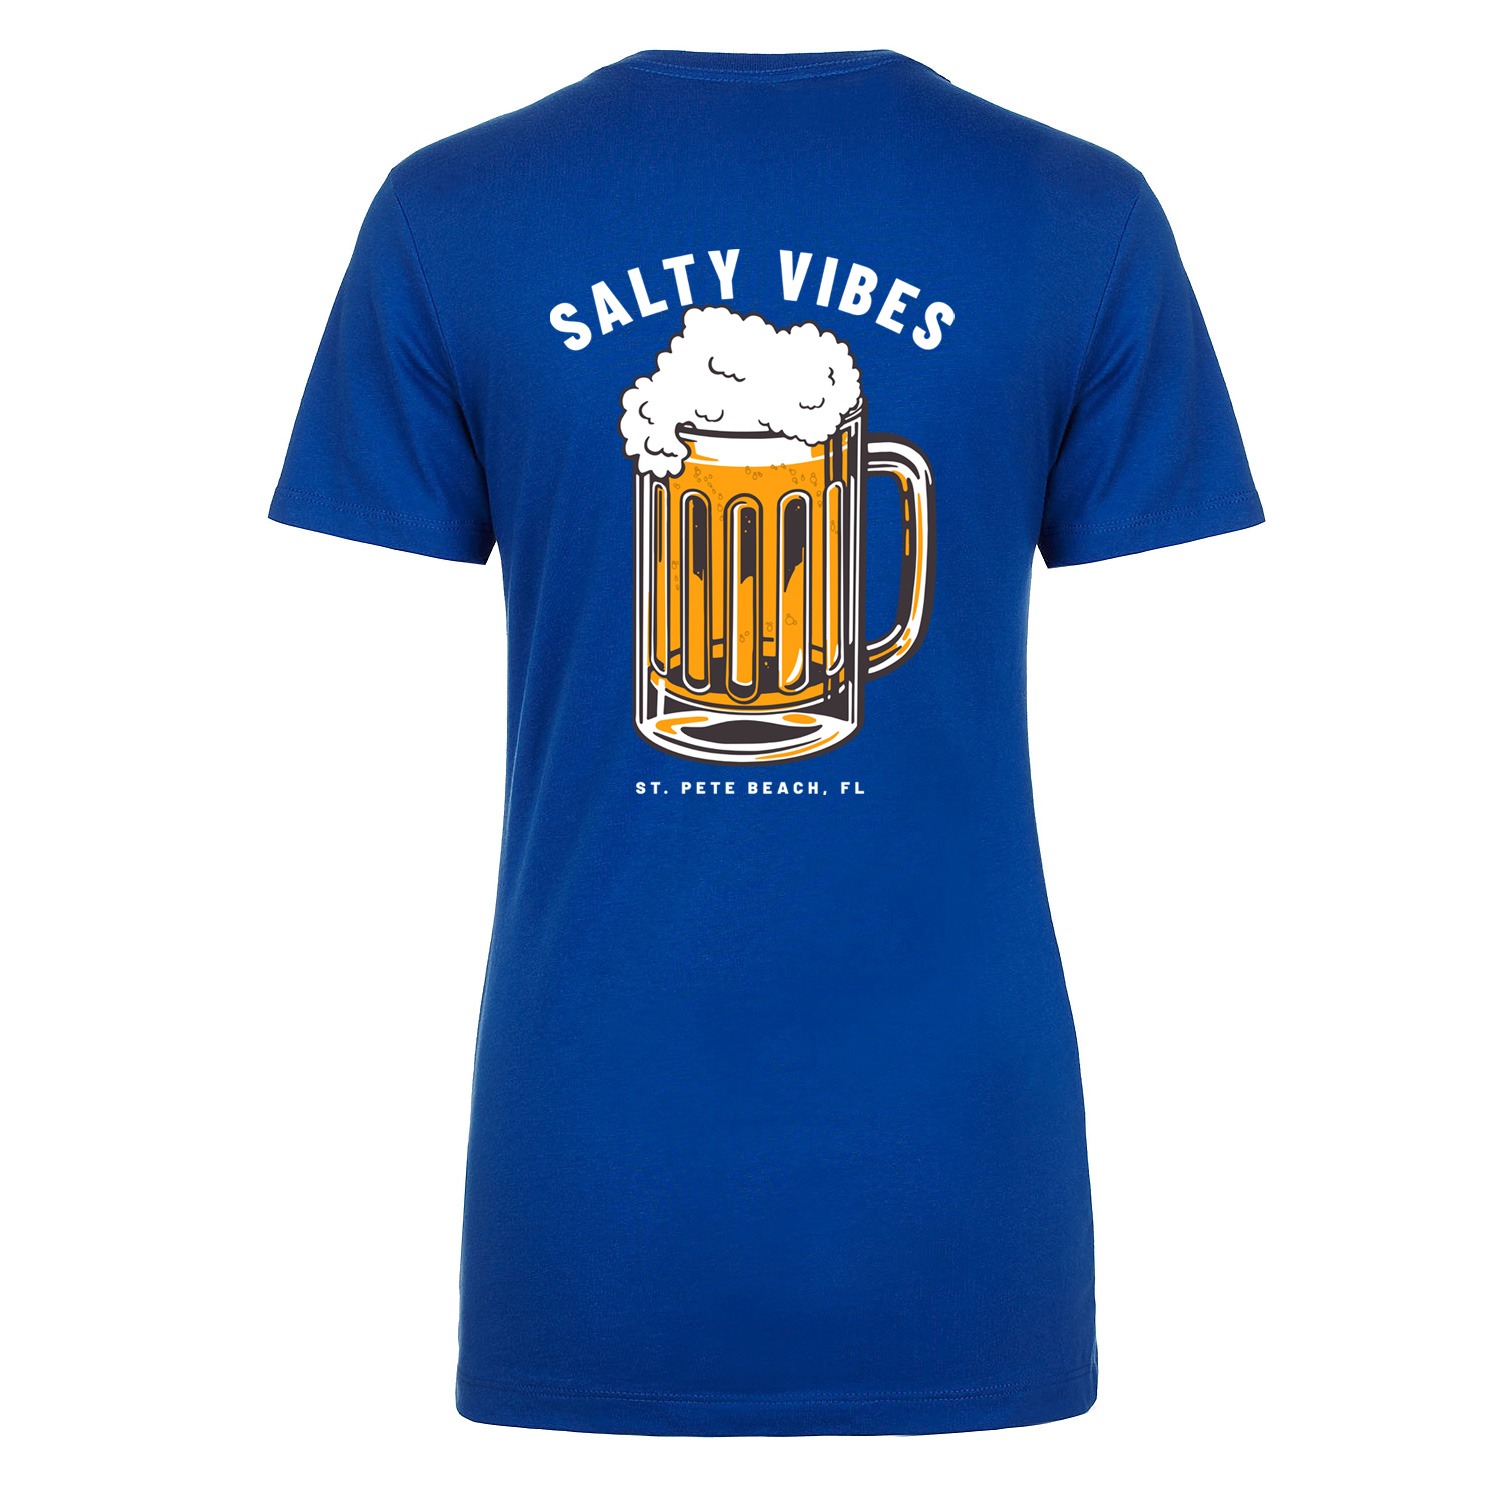 Salty Vibes Beer Womens Fitted T-shirt - Royal Blue, XL